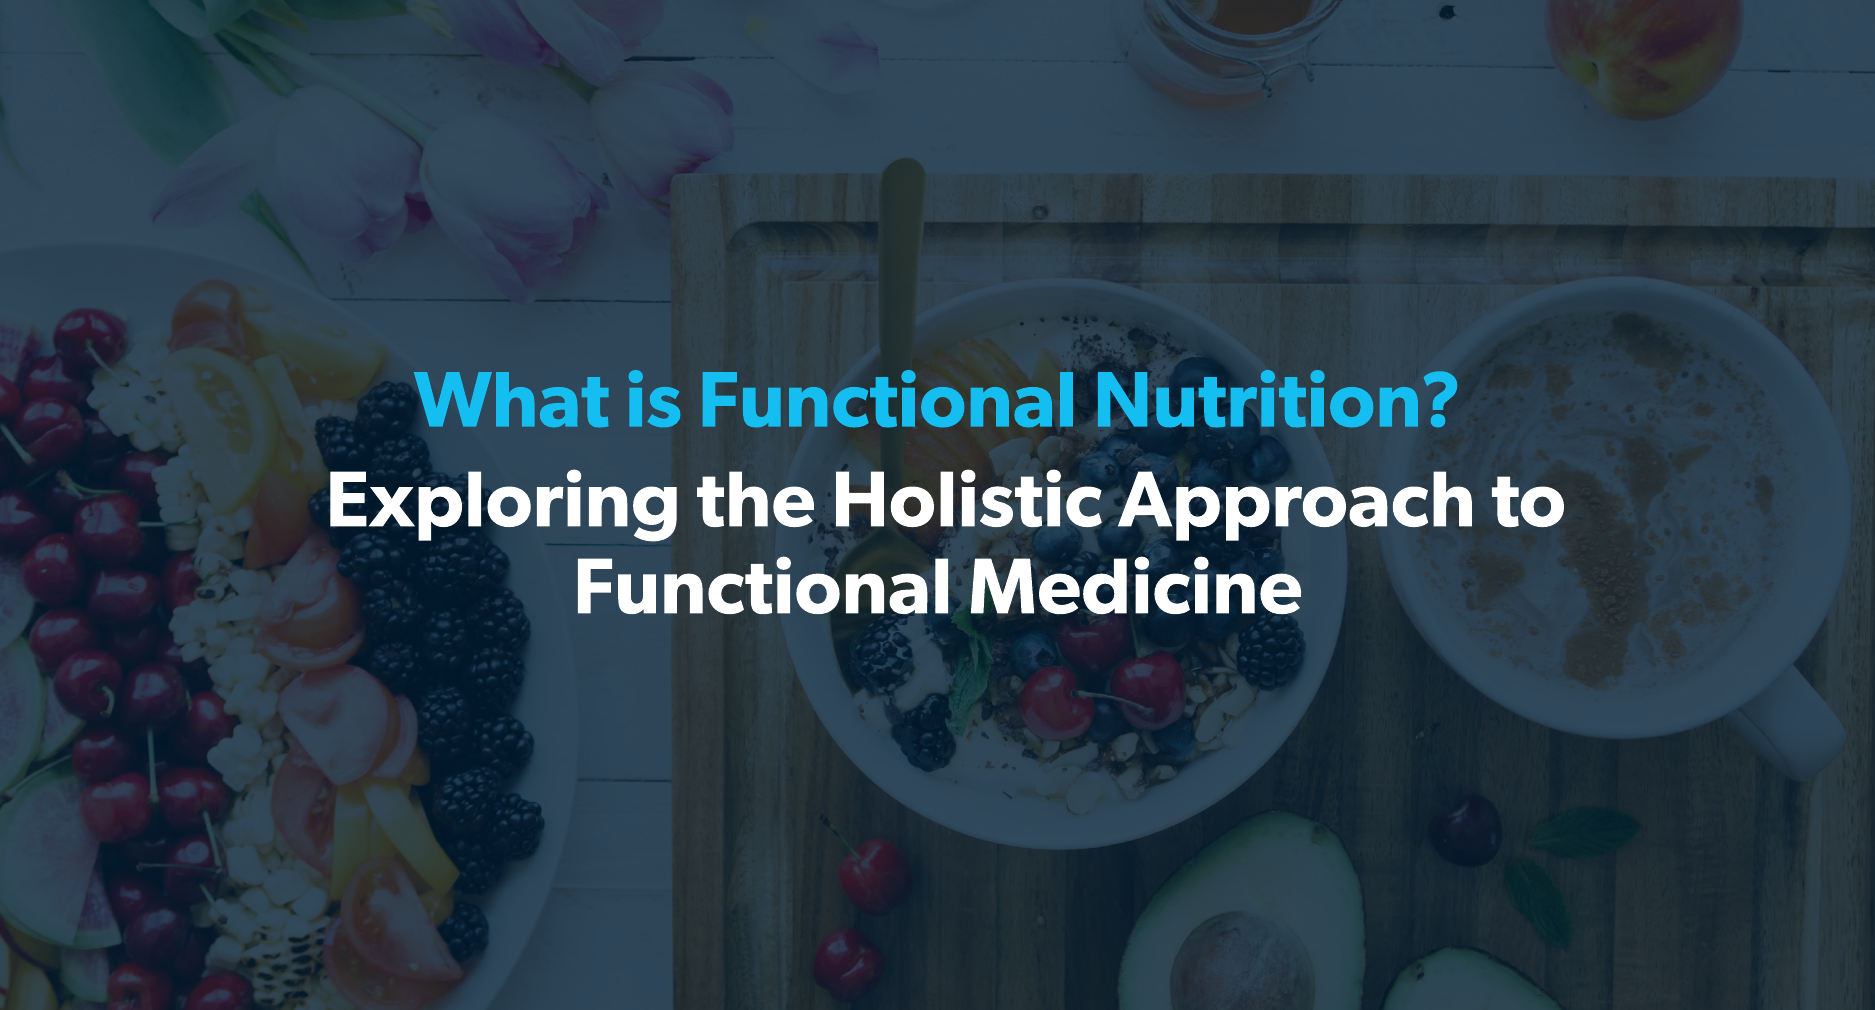 What is Functional Nutrition? Exploring the Holistic Approach to Functional Medicine